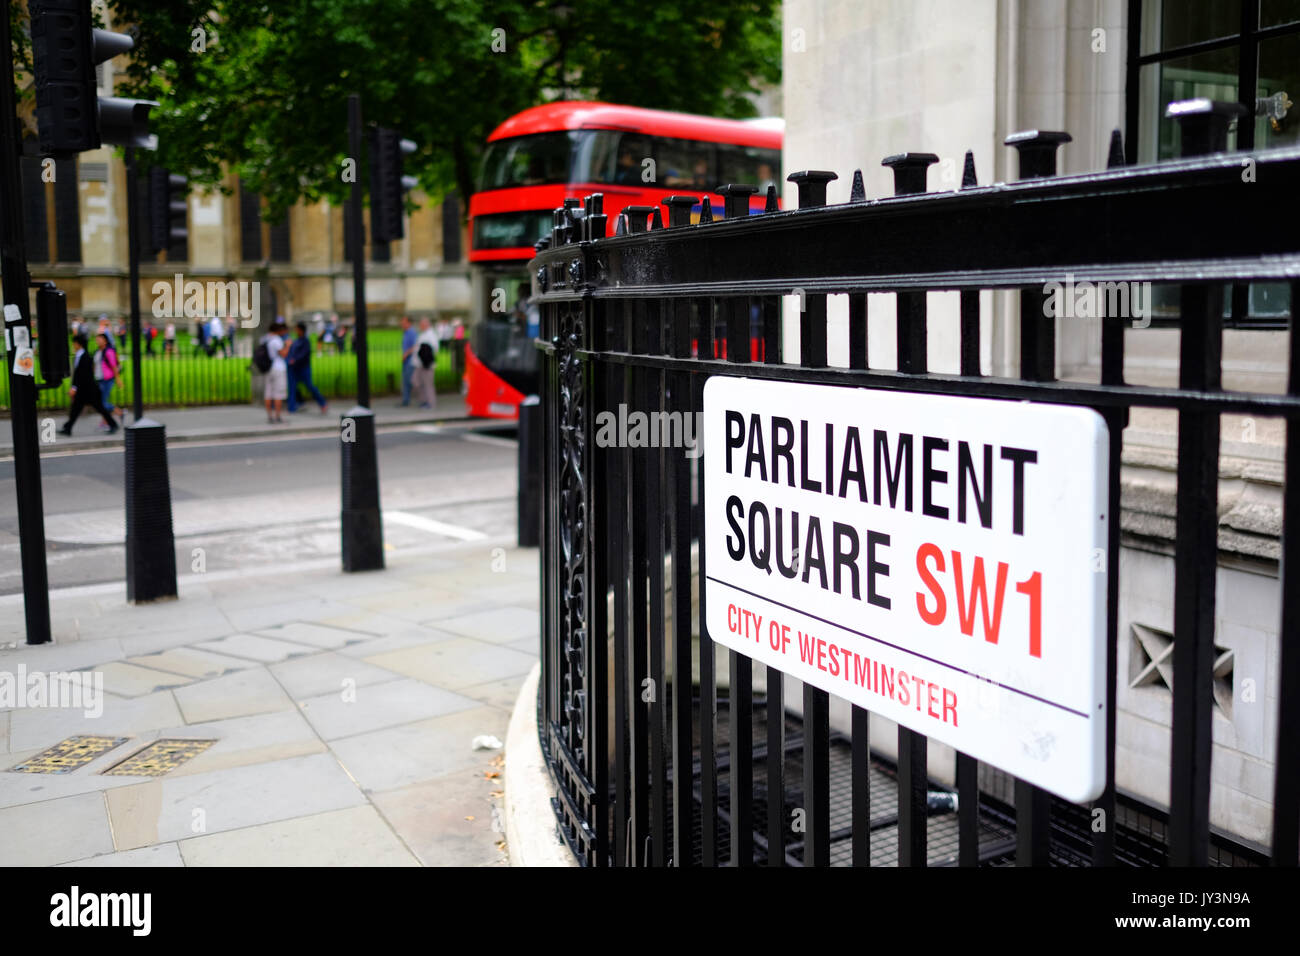 Street sign for Parliament Square in London, SW1 with a red bus in the background Stock Photo